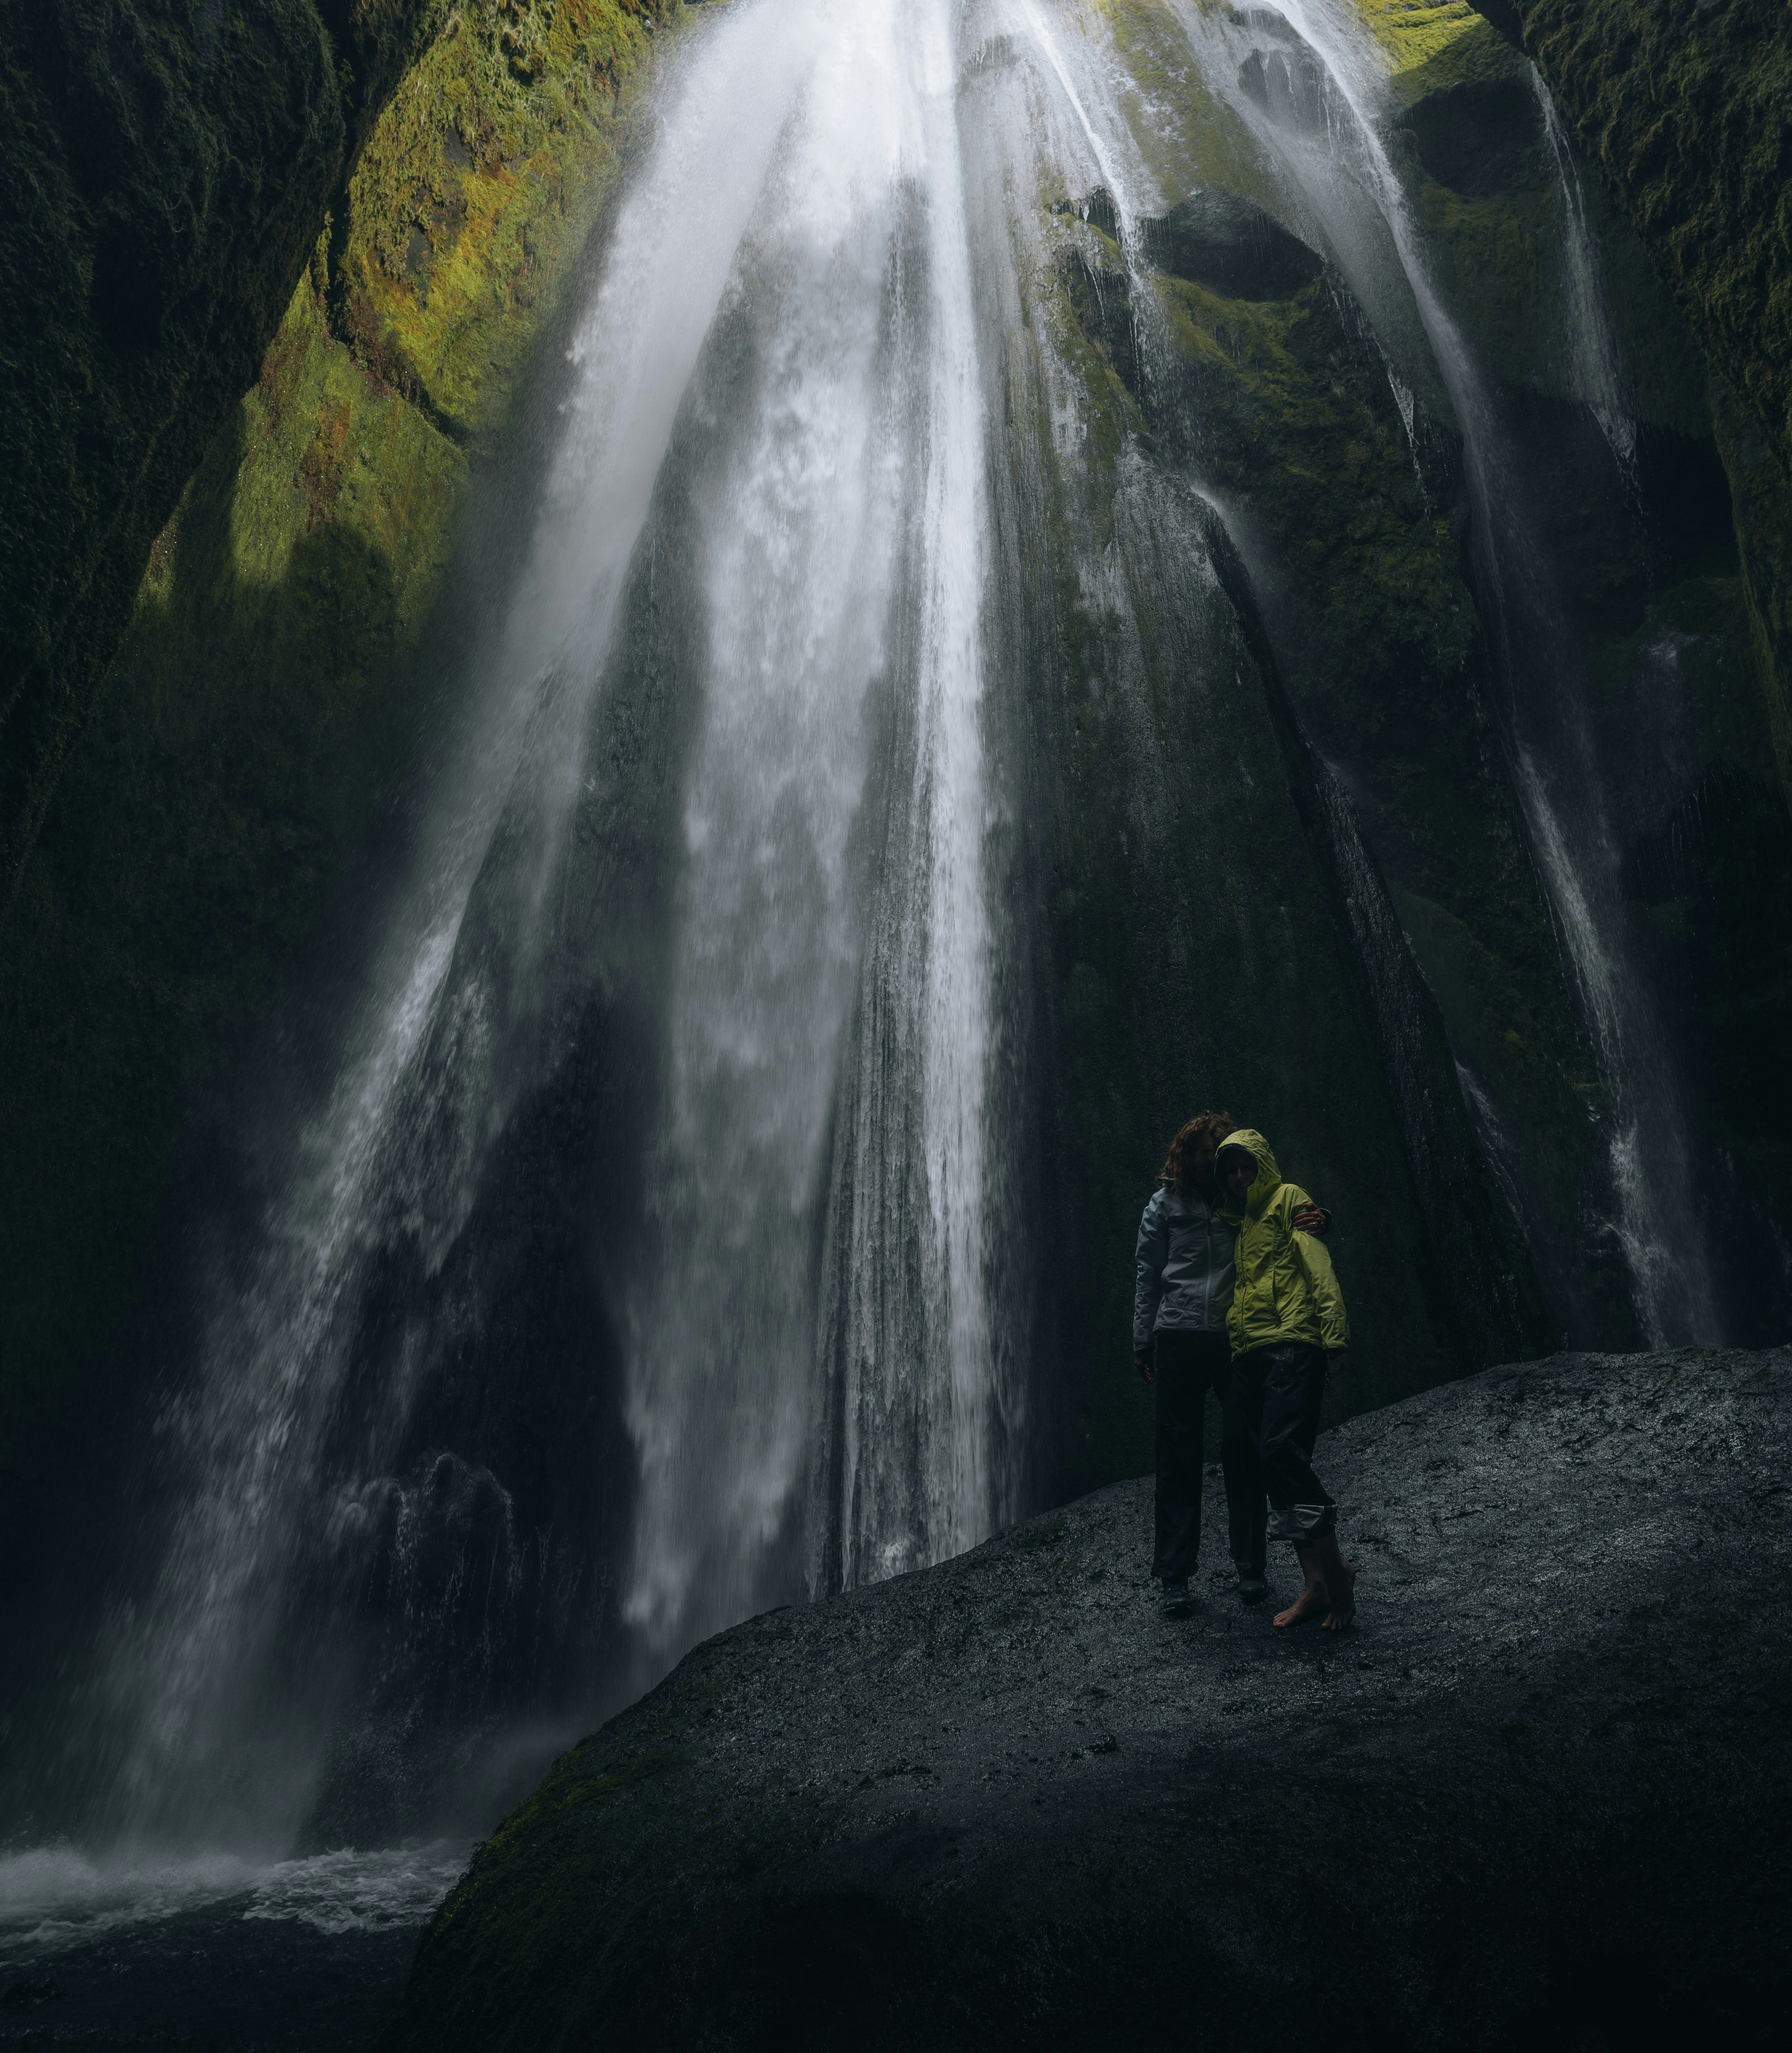 man in yellow jacket and black pants standing on rock near waterfalls during daytime